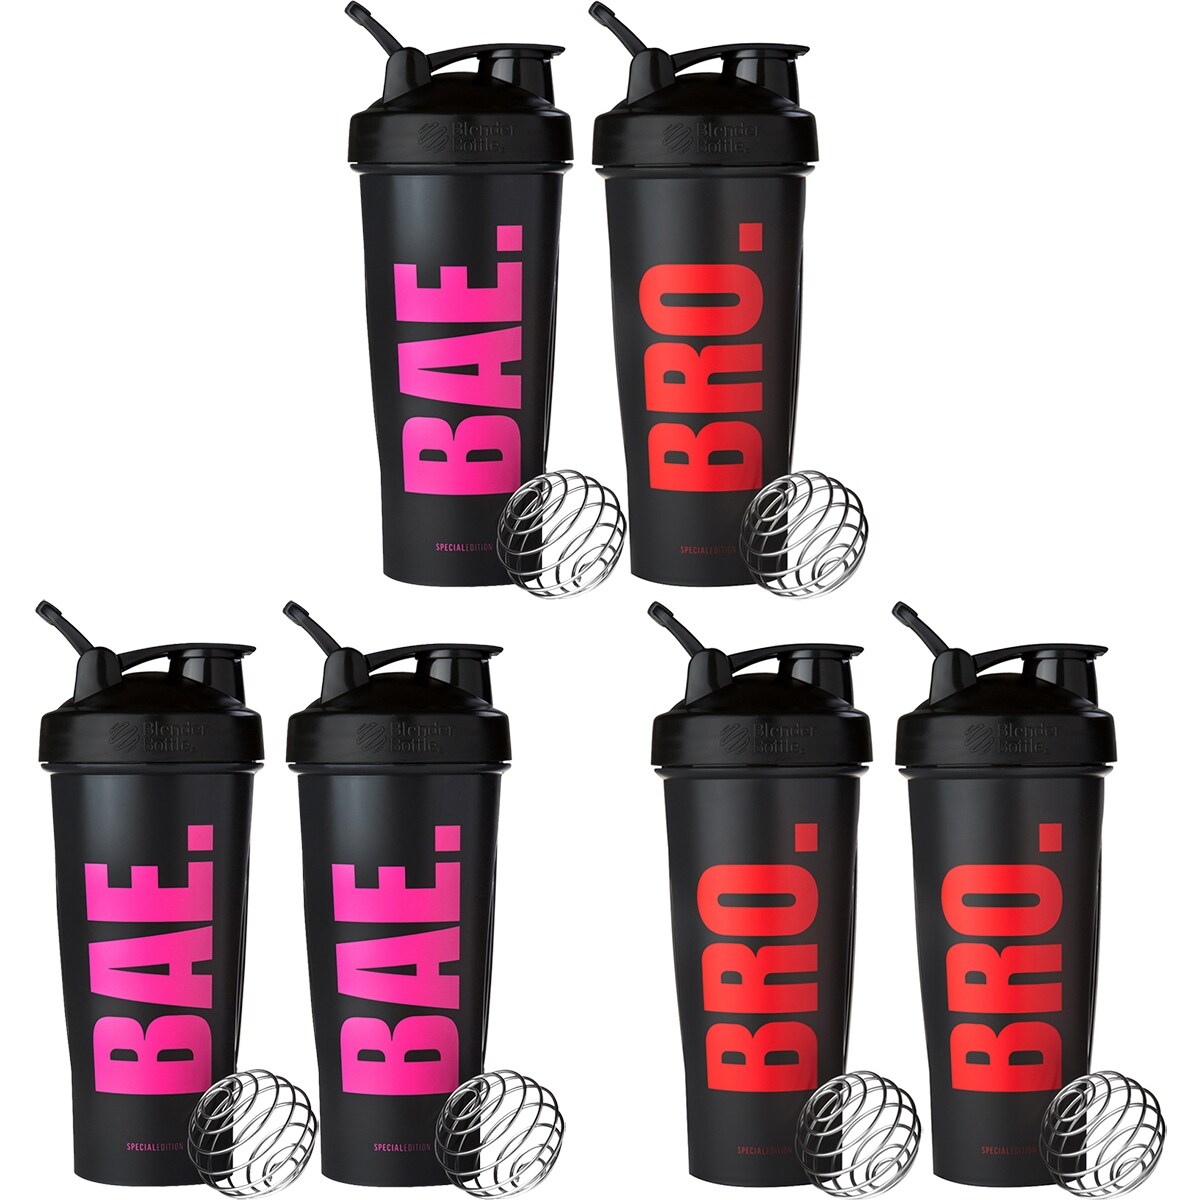 https://ak1.ostkcdn.com/images/products/is/images/direct/8c766c69b69a081d145d5c8a047d312c1a50f6c0/Blender-Bottle-Special-Edition-28-oz.-Bae-Bro-Shaker-Bottle-Mix-%26-Match-Two-Pack.jpg